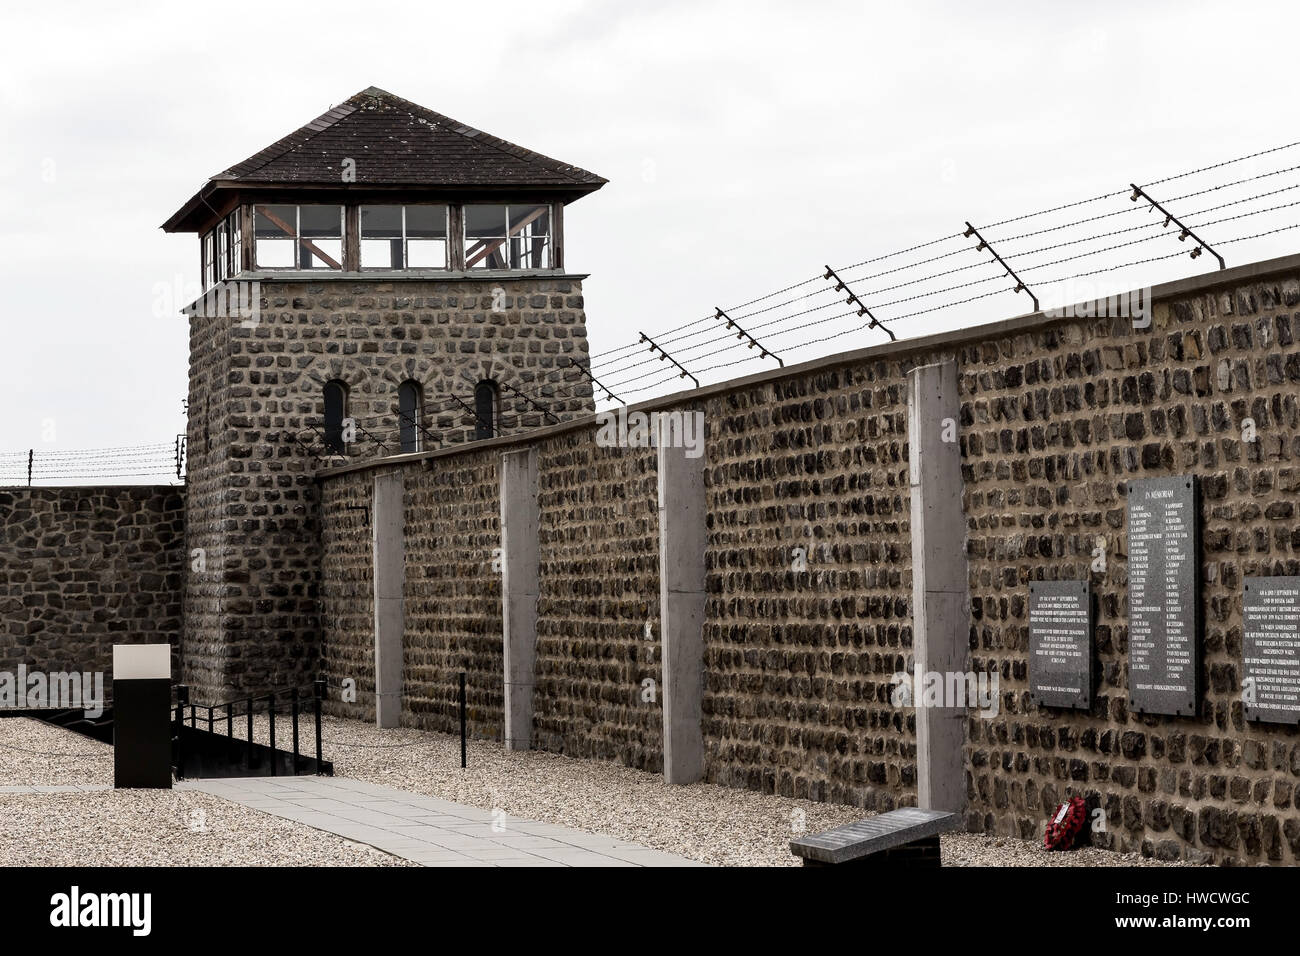 The concentration camp Mauthausen in Austria. Concentration camp of the step III from 1938 to 1945, Das Konzentrationslager Mauthausen in Österreich.  Stock Photo